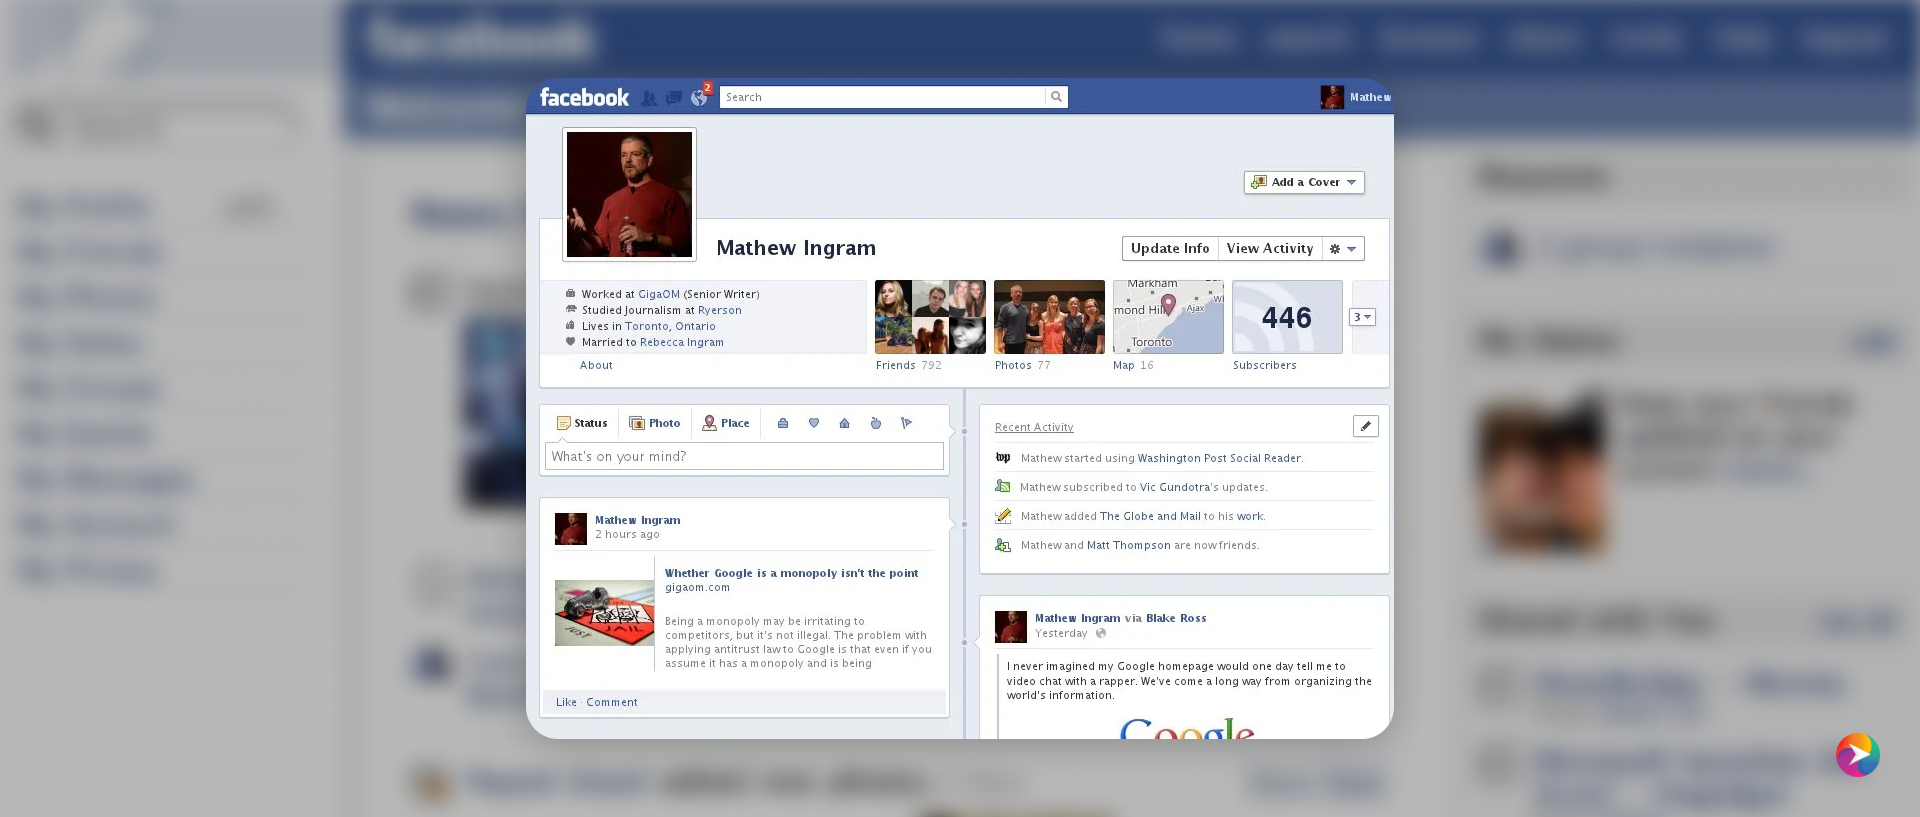 INTRODUCING THE FACEBOOK TIMELINE